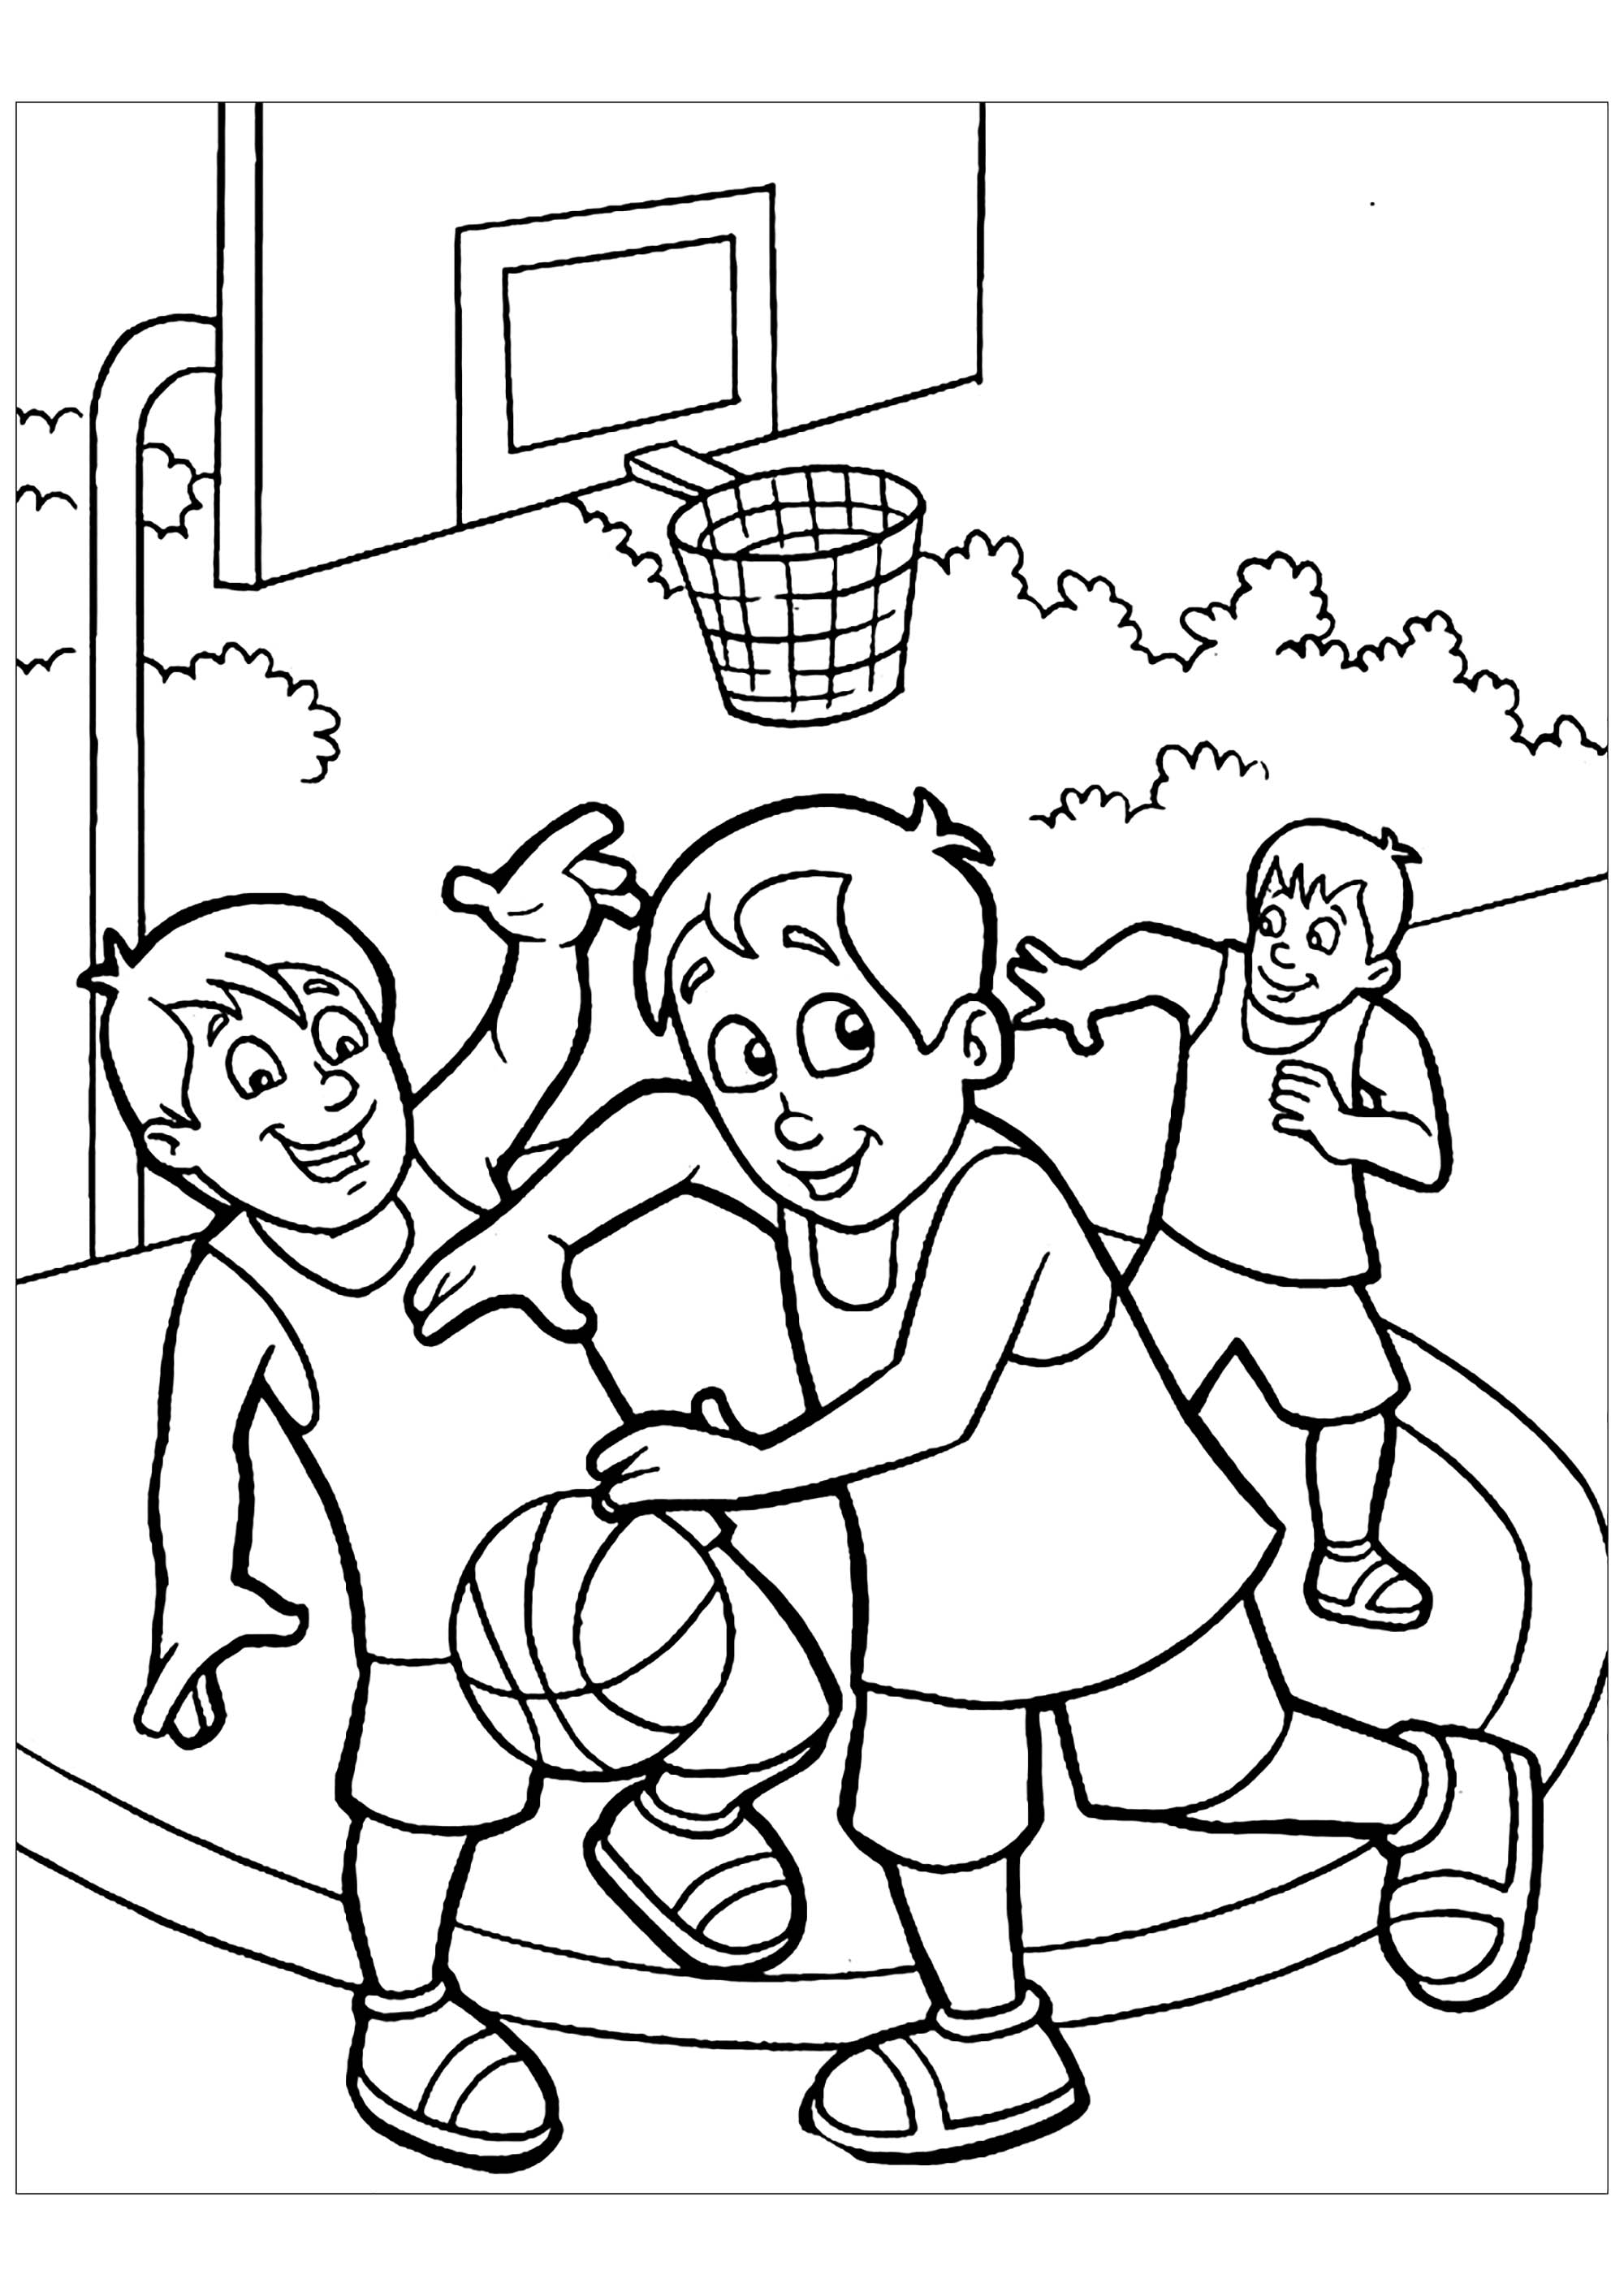 basketball coloring pages free basketball coloring pages to print 30 free coloring pages basketball 